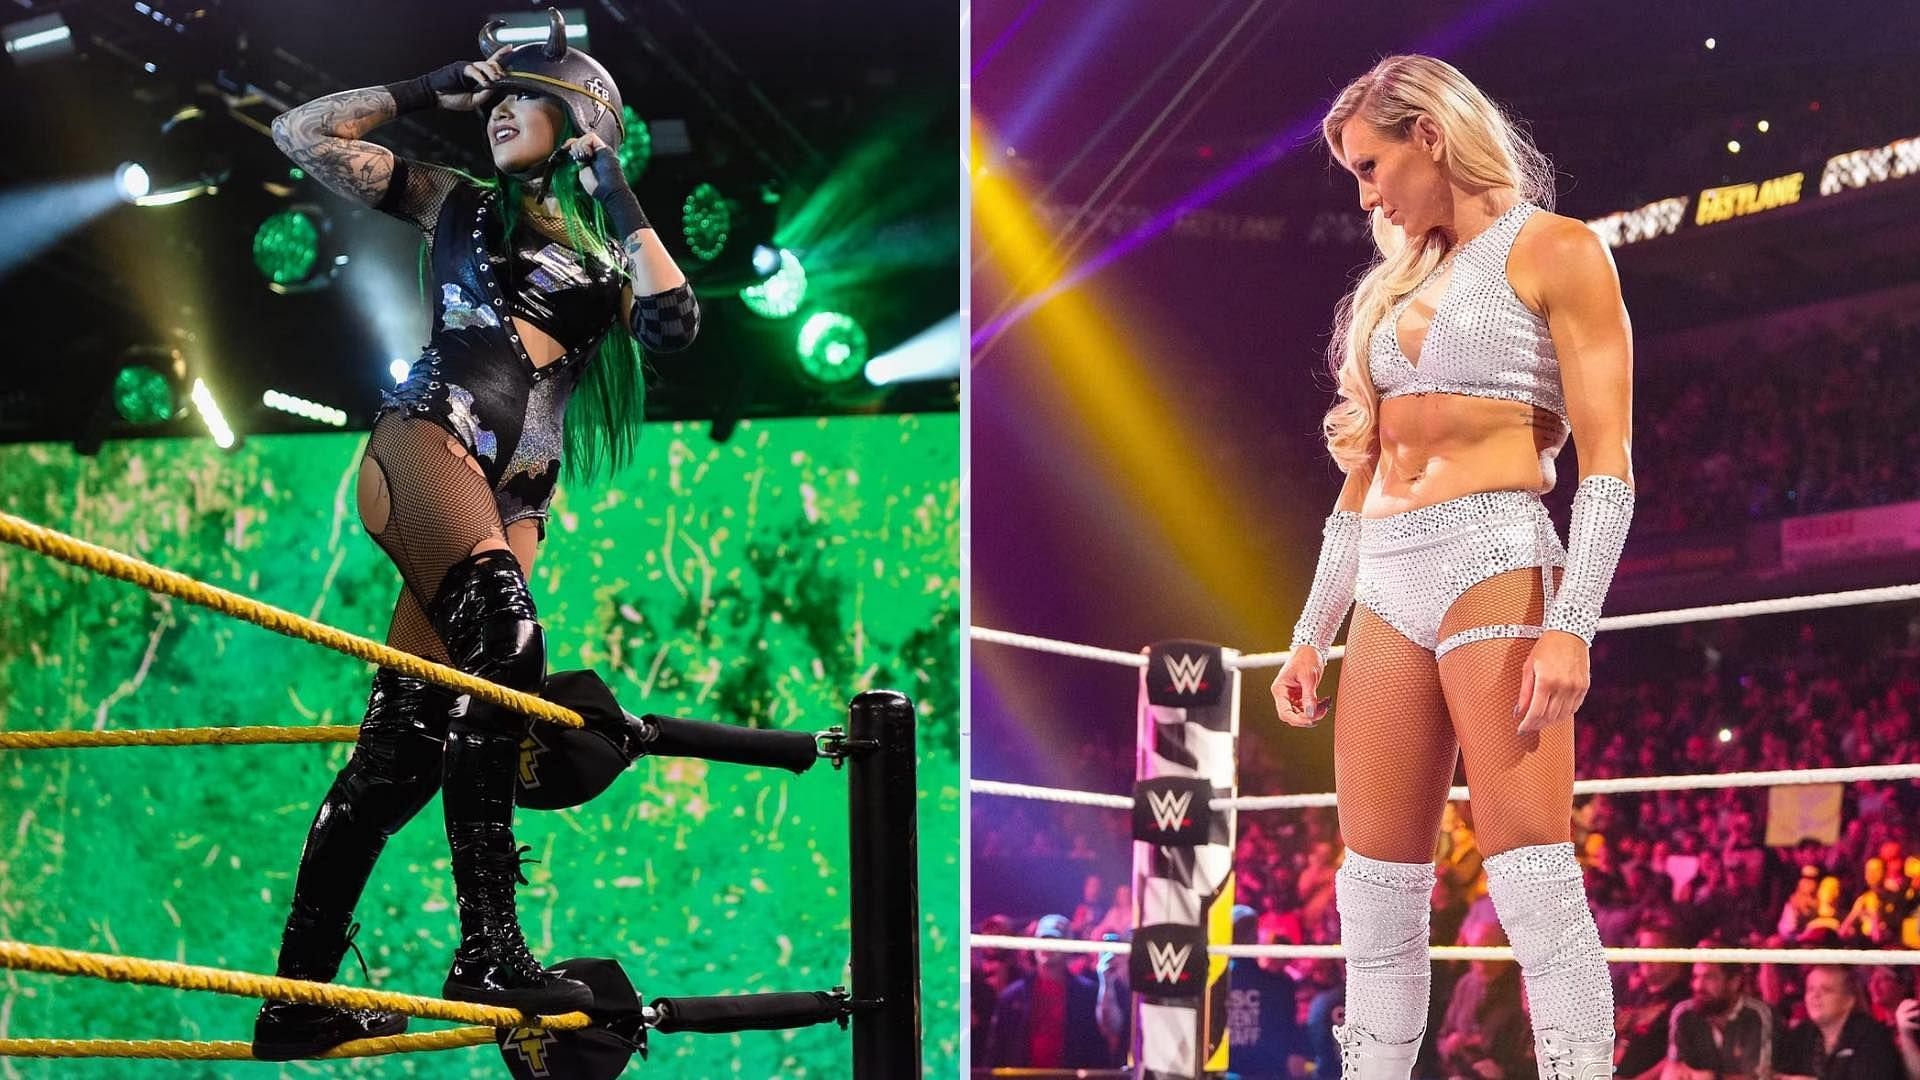 Shotzi could be on WWE NXT regularly, especially if her injury isn